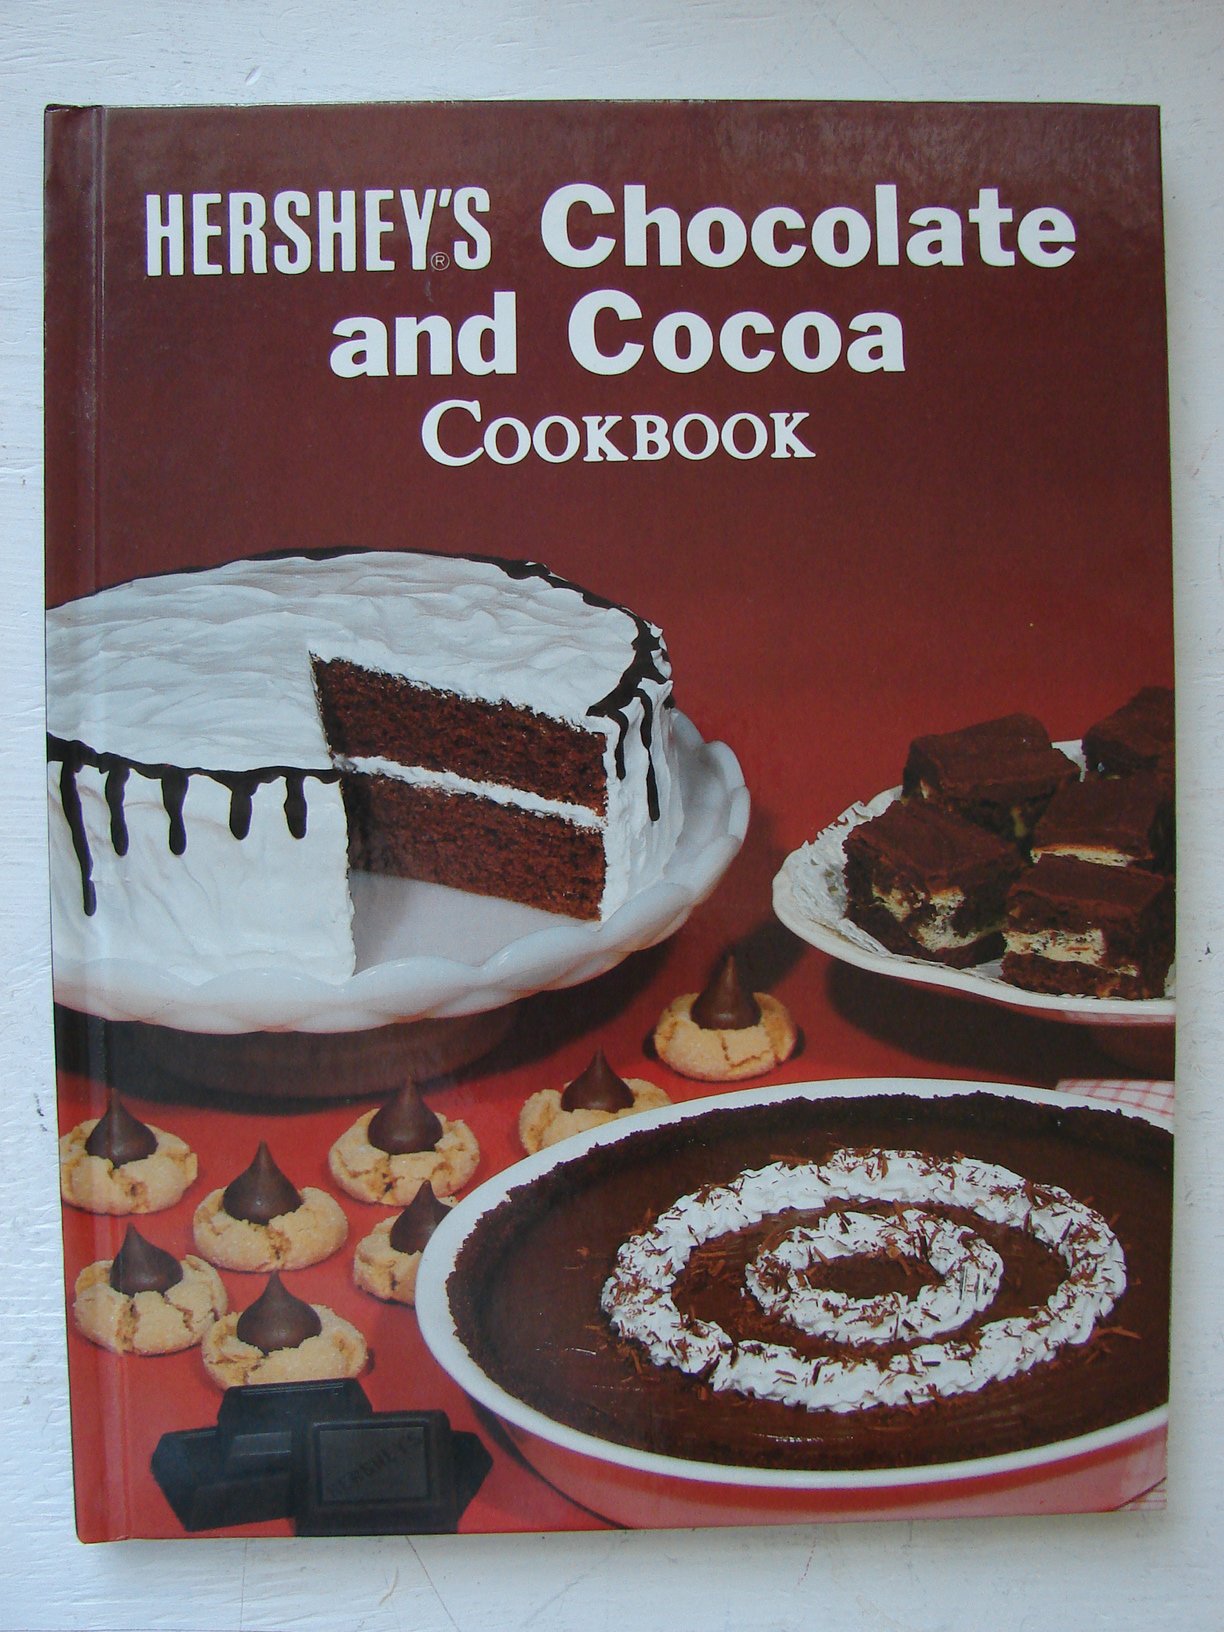 Hershey's Chocolate and Cocoa Cookbook [Hardcover] Noland Susan